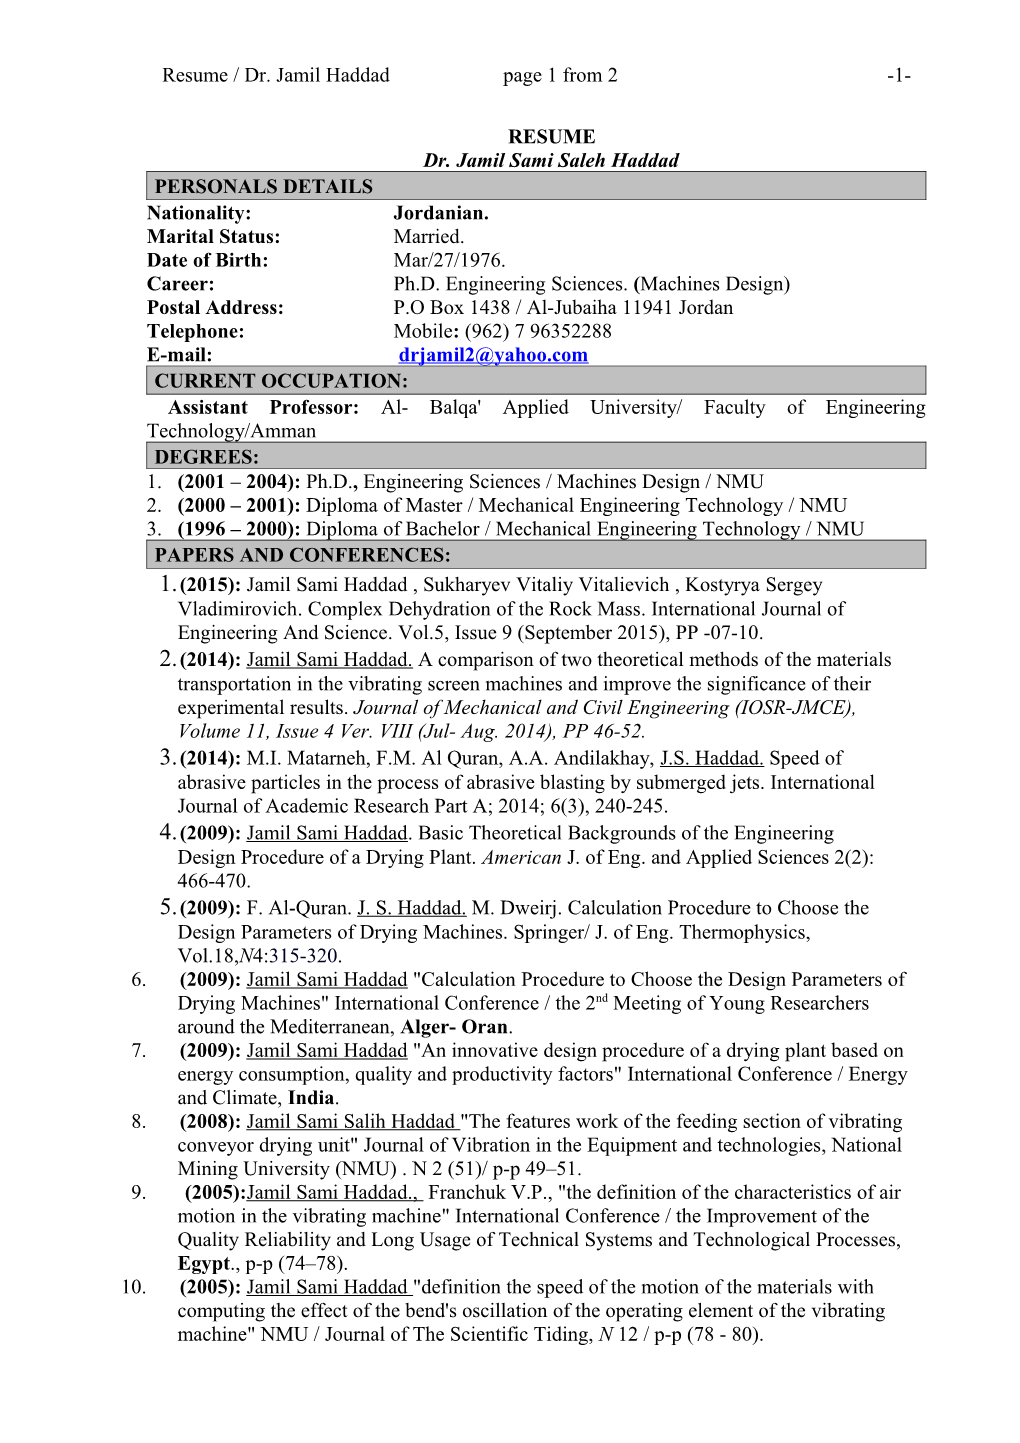 Resume / Dr. Jamil Haddad Page 1 from 2-1